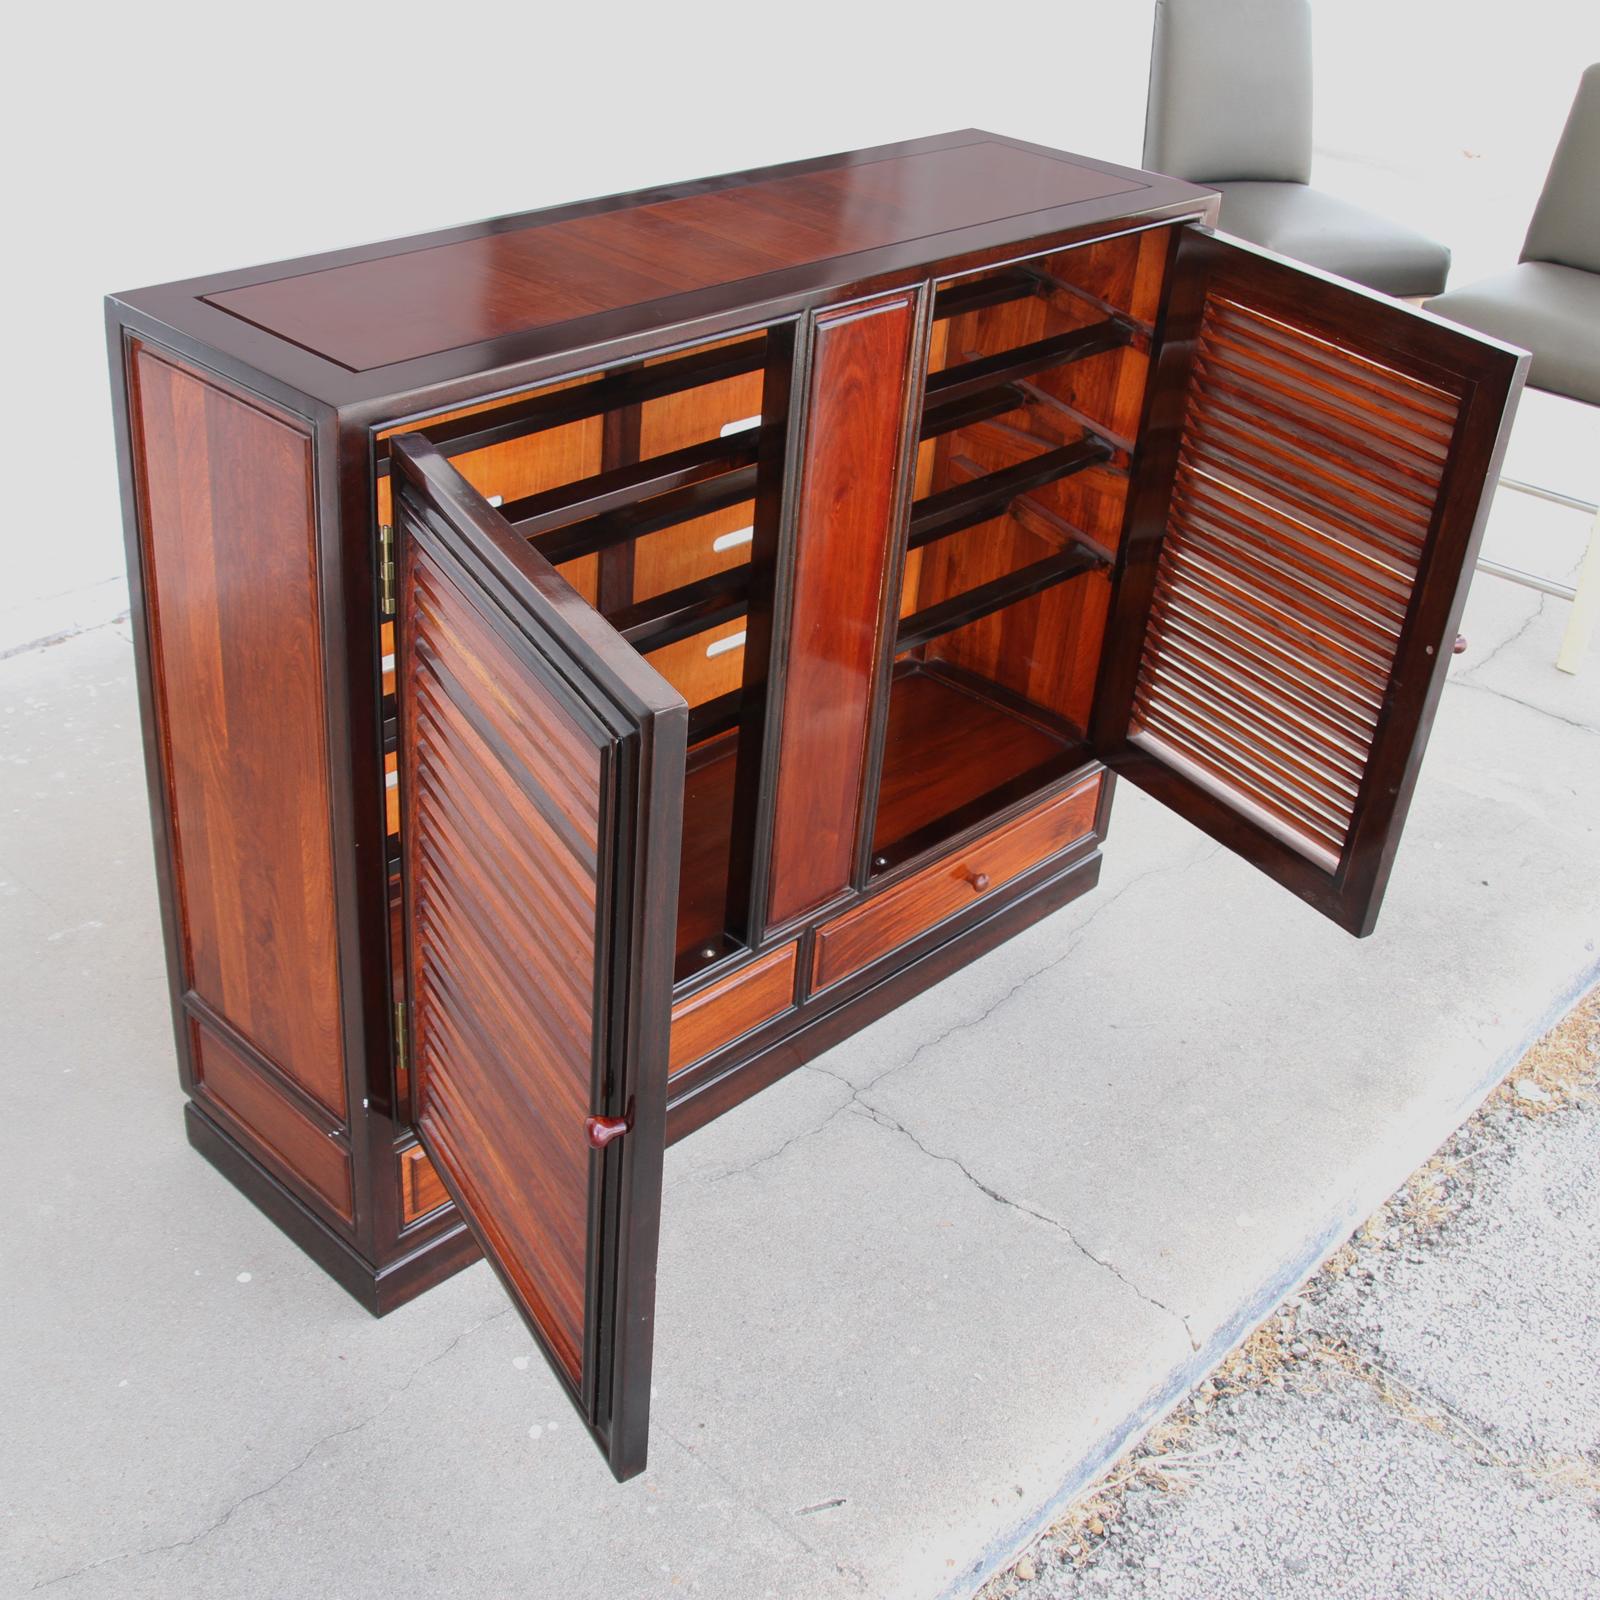 Japonisme Contemporary Japanese Style Getabako Shoe Cabinet from Thailand For Sale